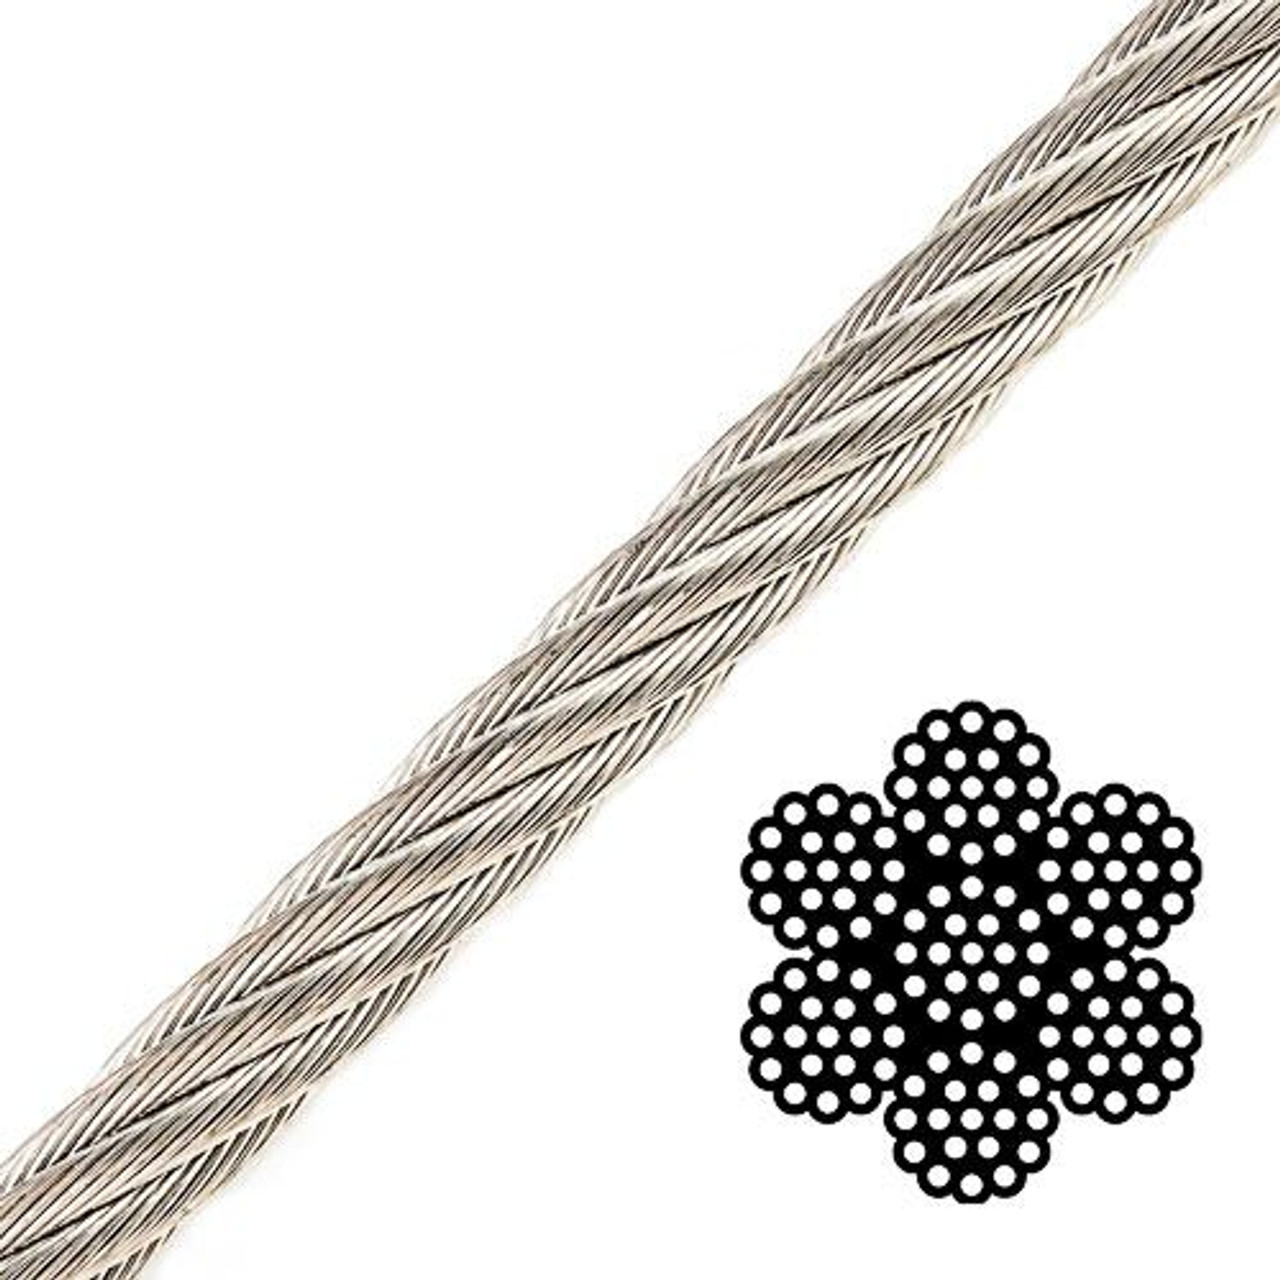 1/4'' (6mm) 304 Stainless Steel Aircraft Wire Rope Military Specification,  Lubricated, Car Traction，Lifting Rope Strong Wire Rope 7x19 Strand